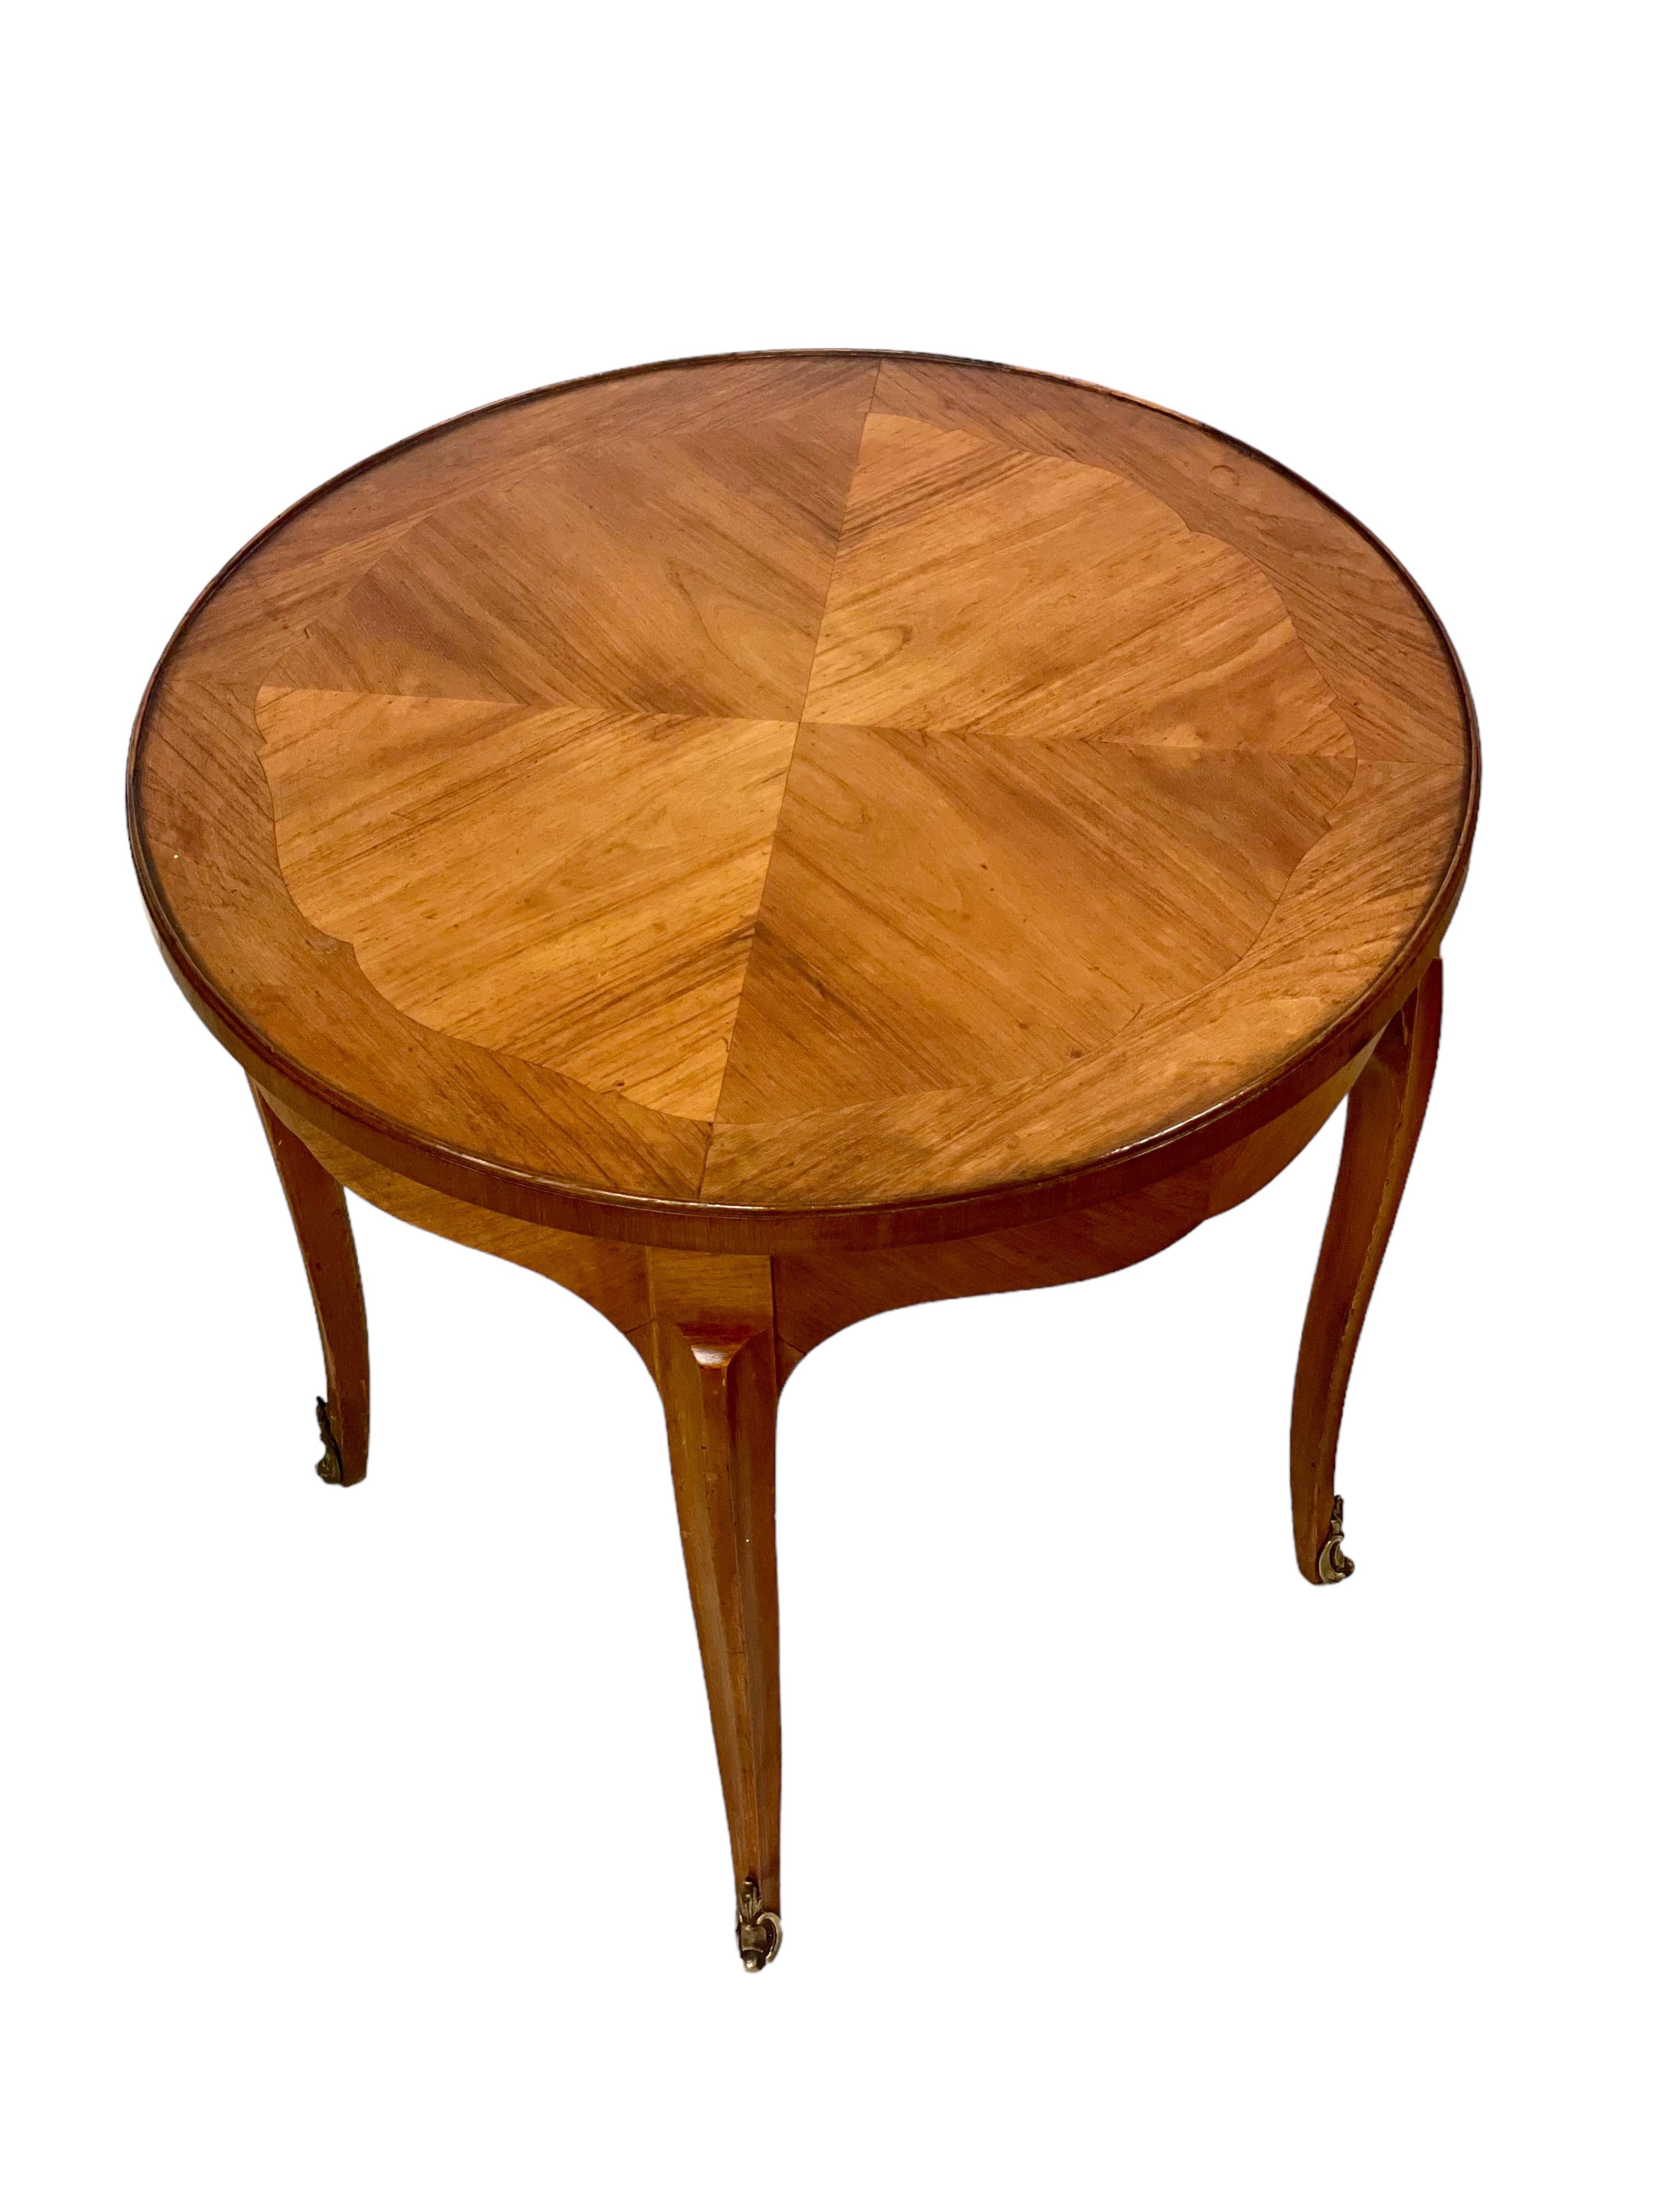 20th Century French Antique Round Salon Coffee or Tea Table For Sale